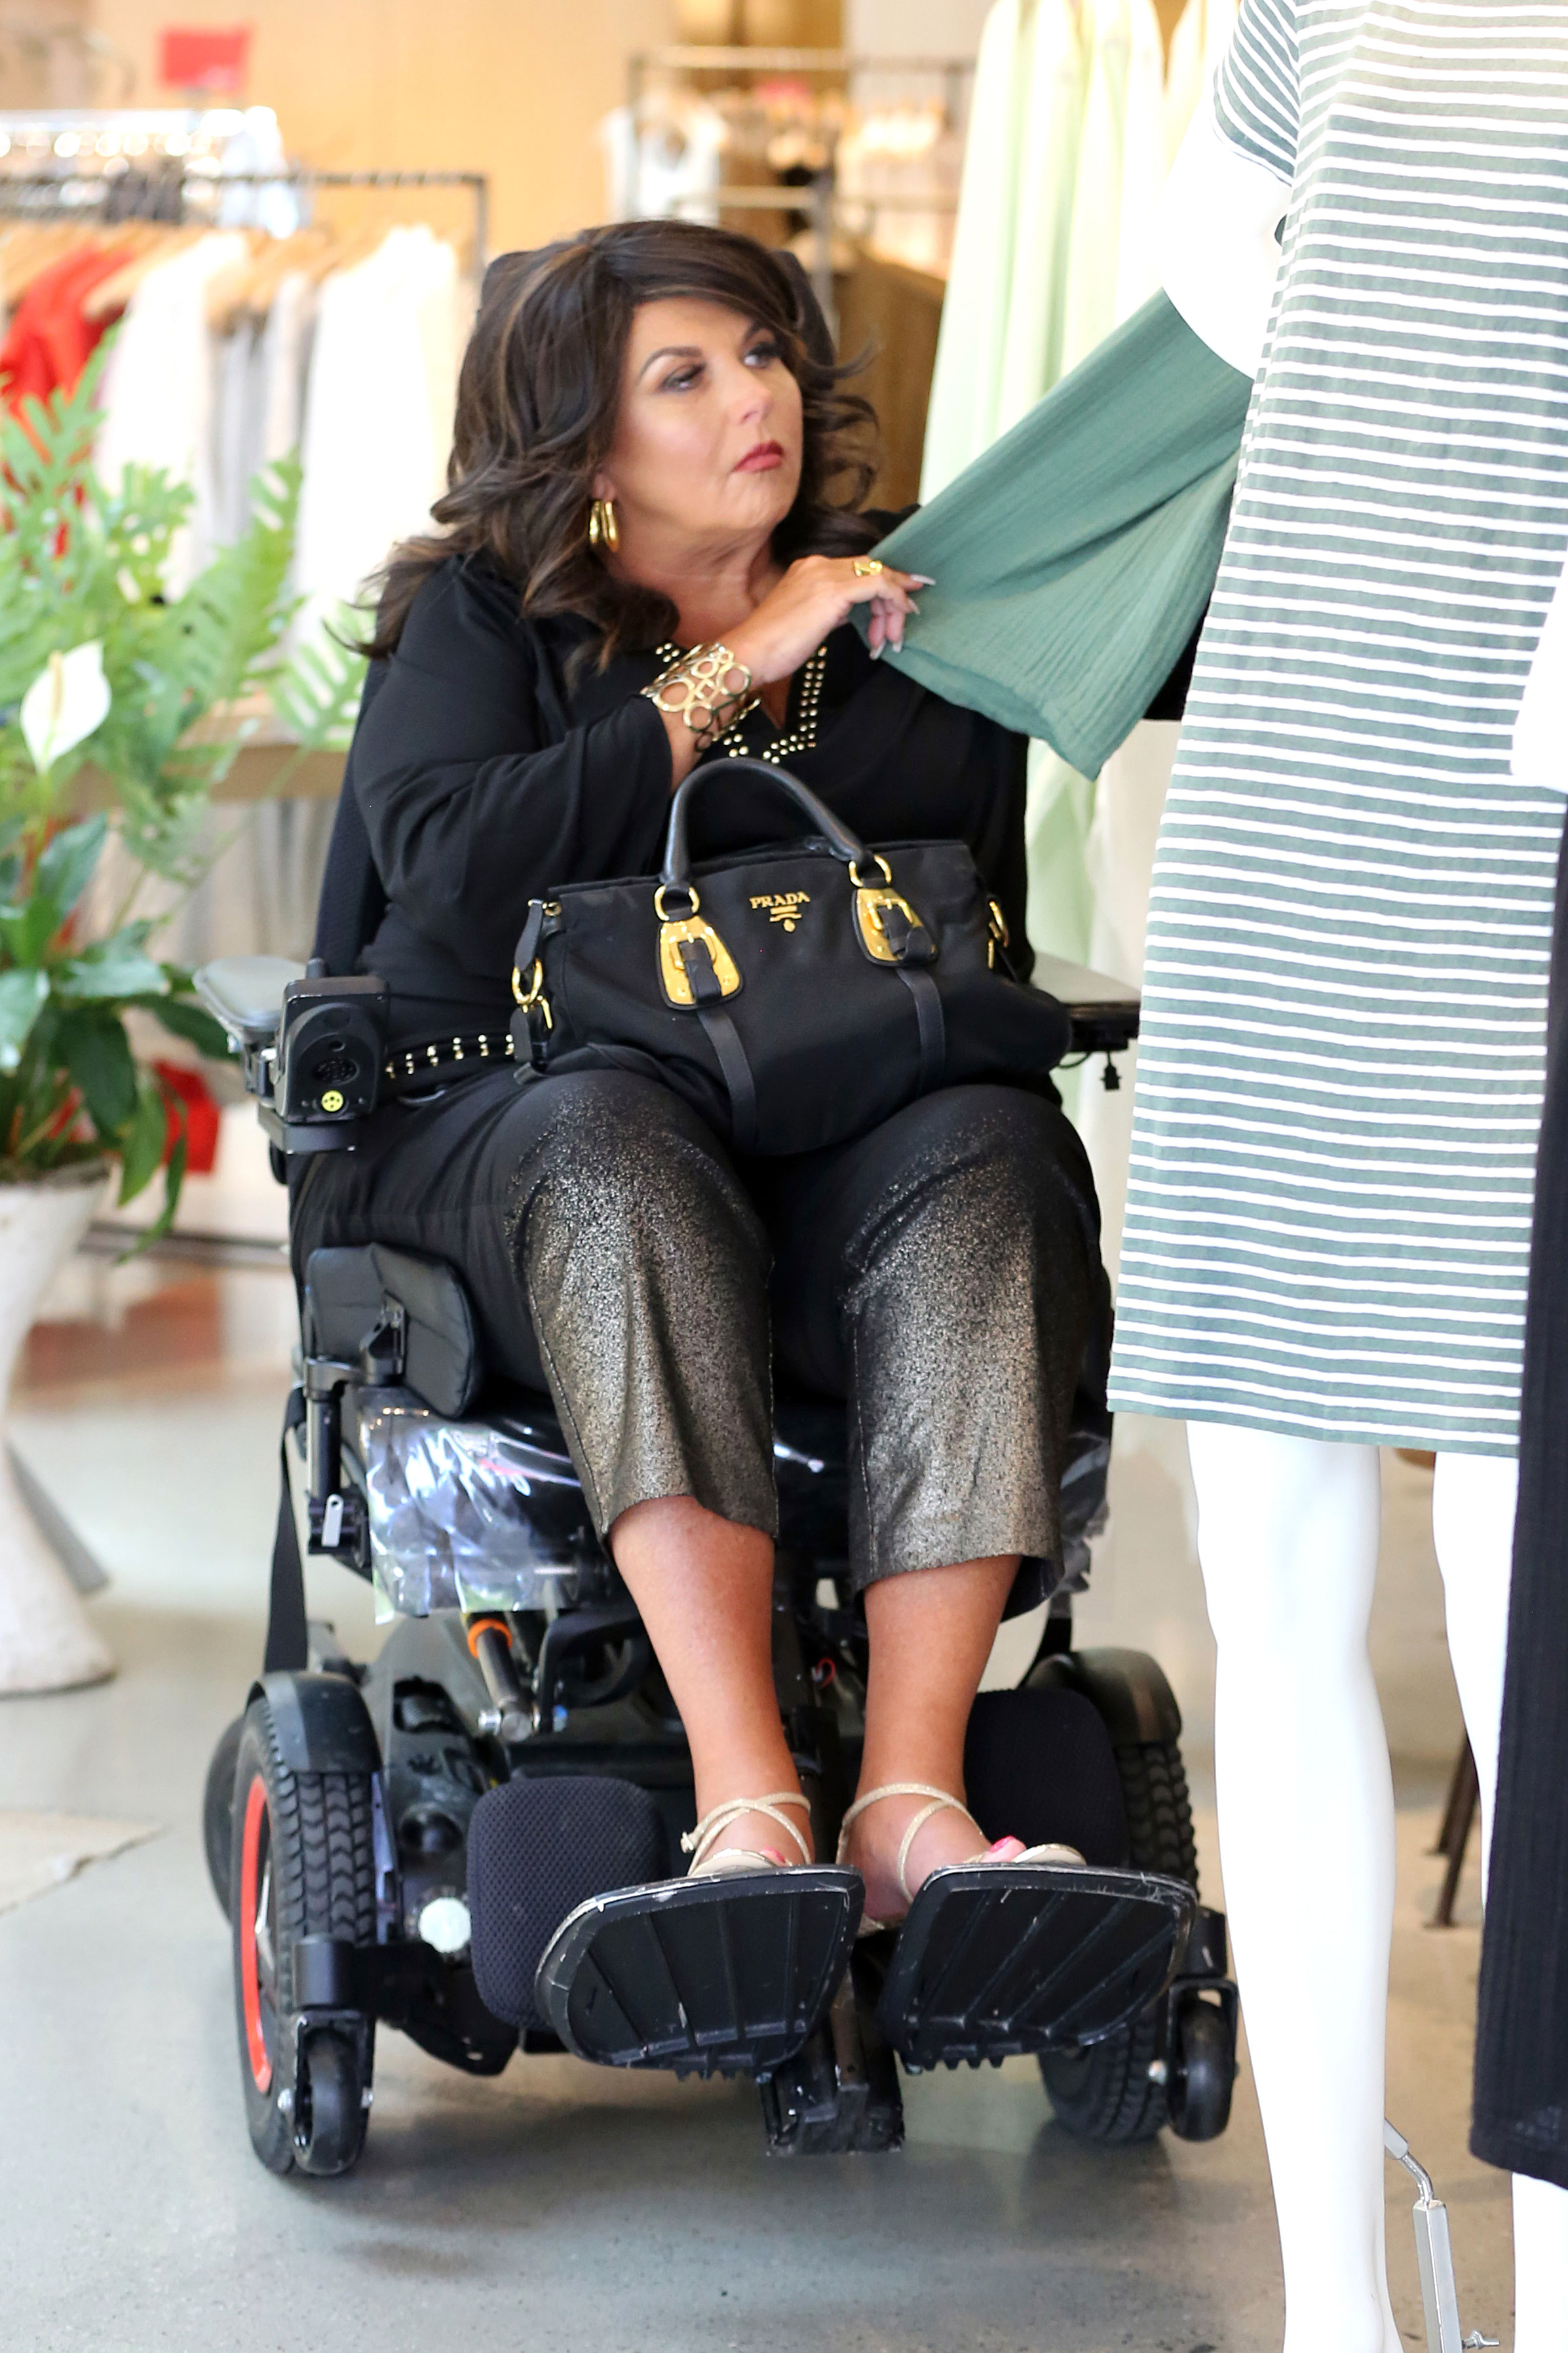 Why Is Abby Lee Miller In a Wheelchair? - Abby Lee Miller In